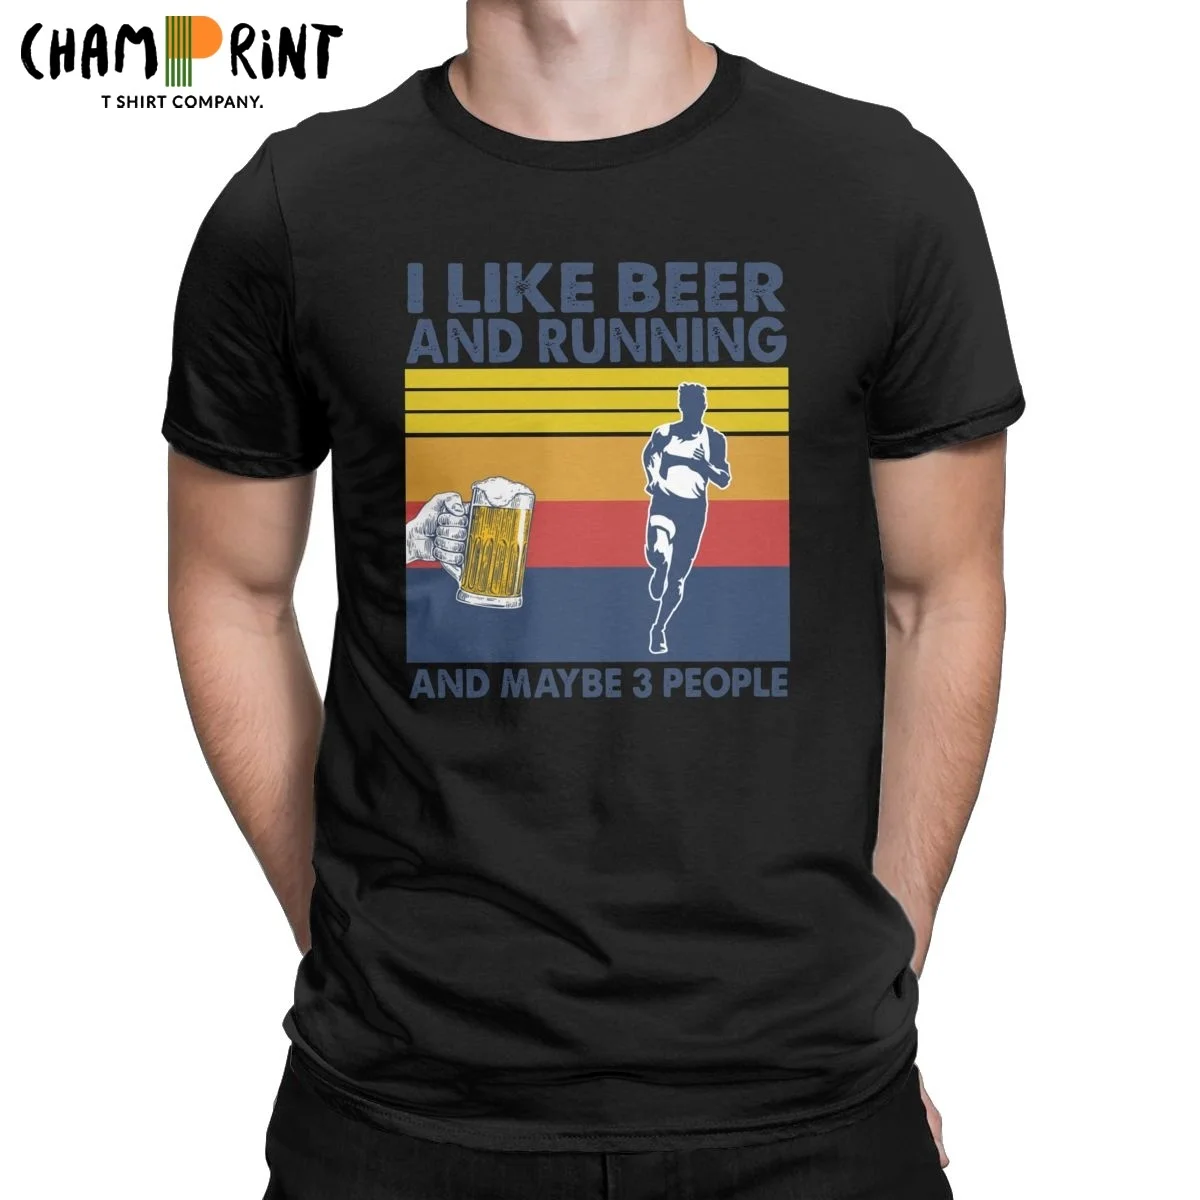 

Drink Beer I Like Beer And Running And Maybe 3 People T Shirt Men 100% Cotton Novelty T-Shirt Crewneck Tee Clothes Gift Idea